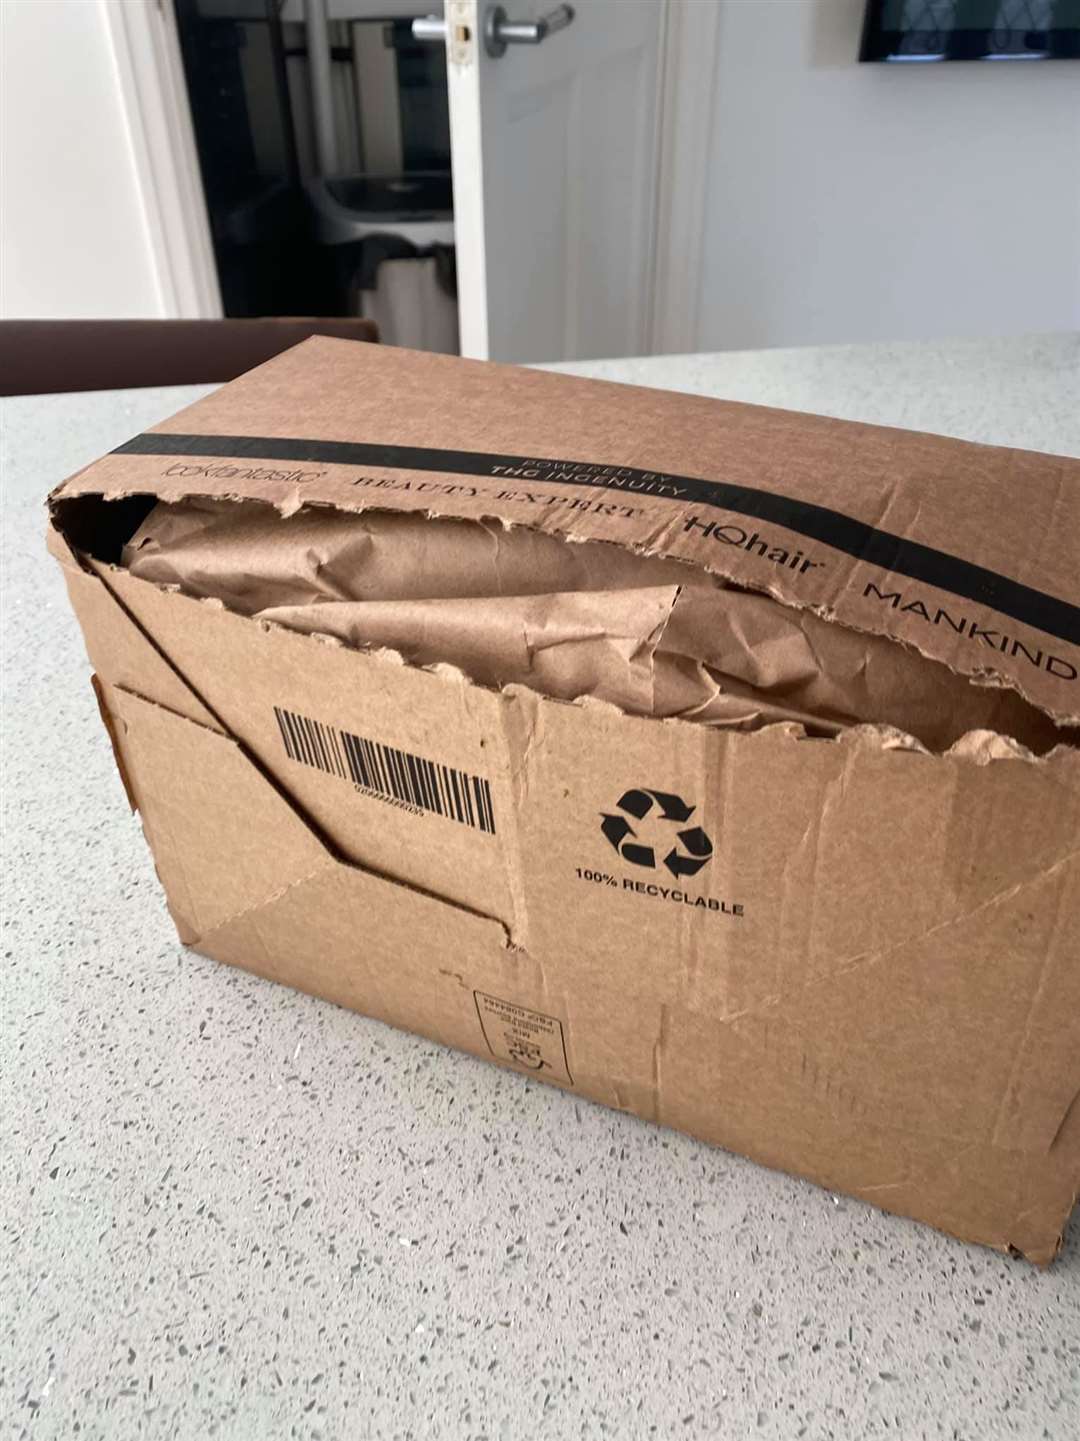 Luckily the parcel was not too damaged